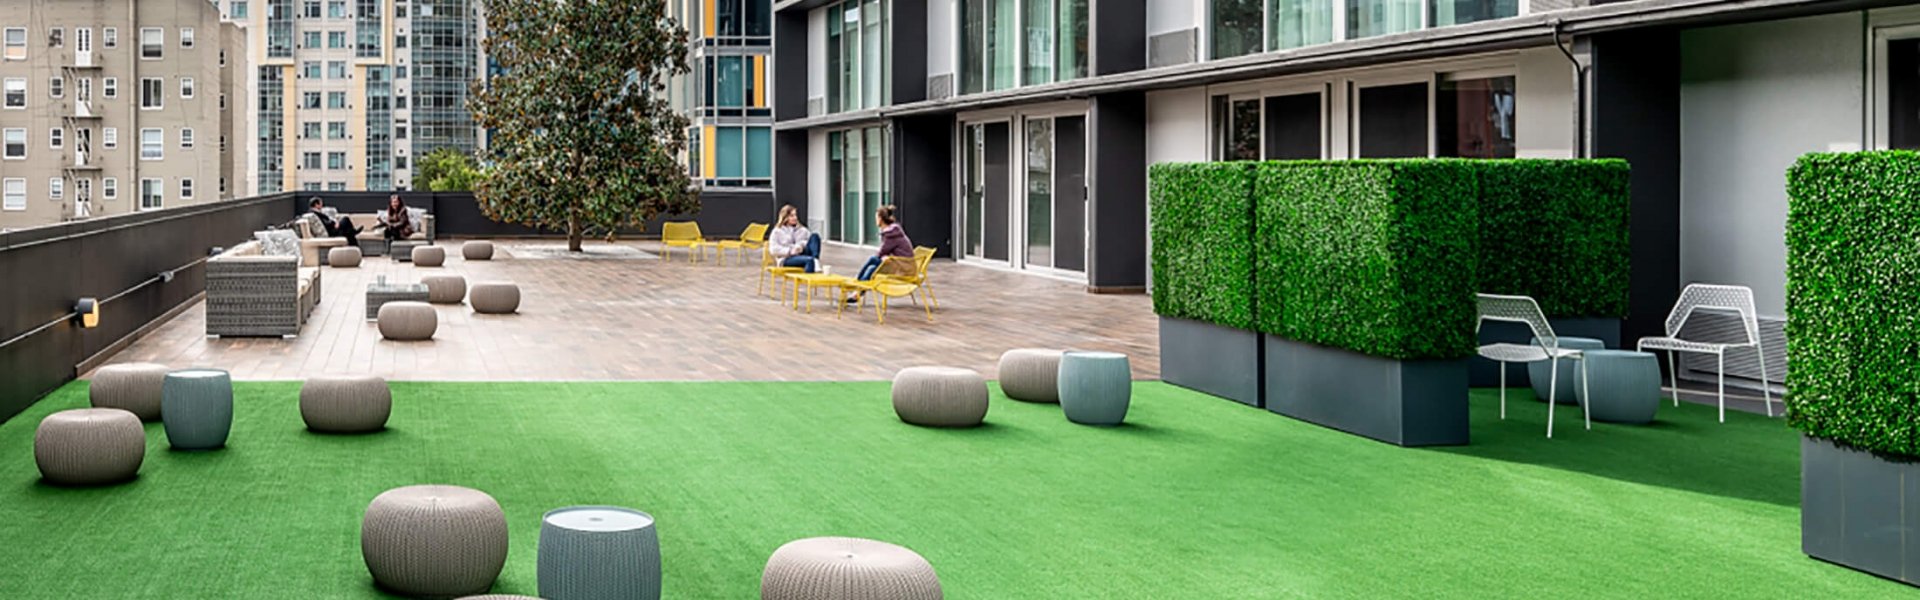 outdoor terrace green space with astroturf